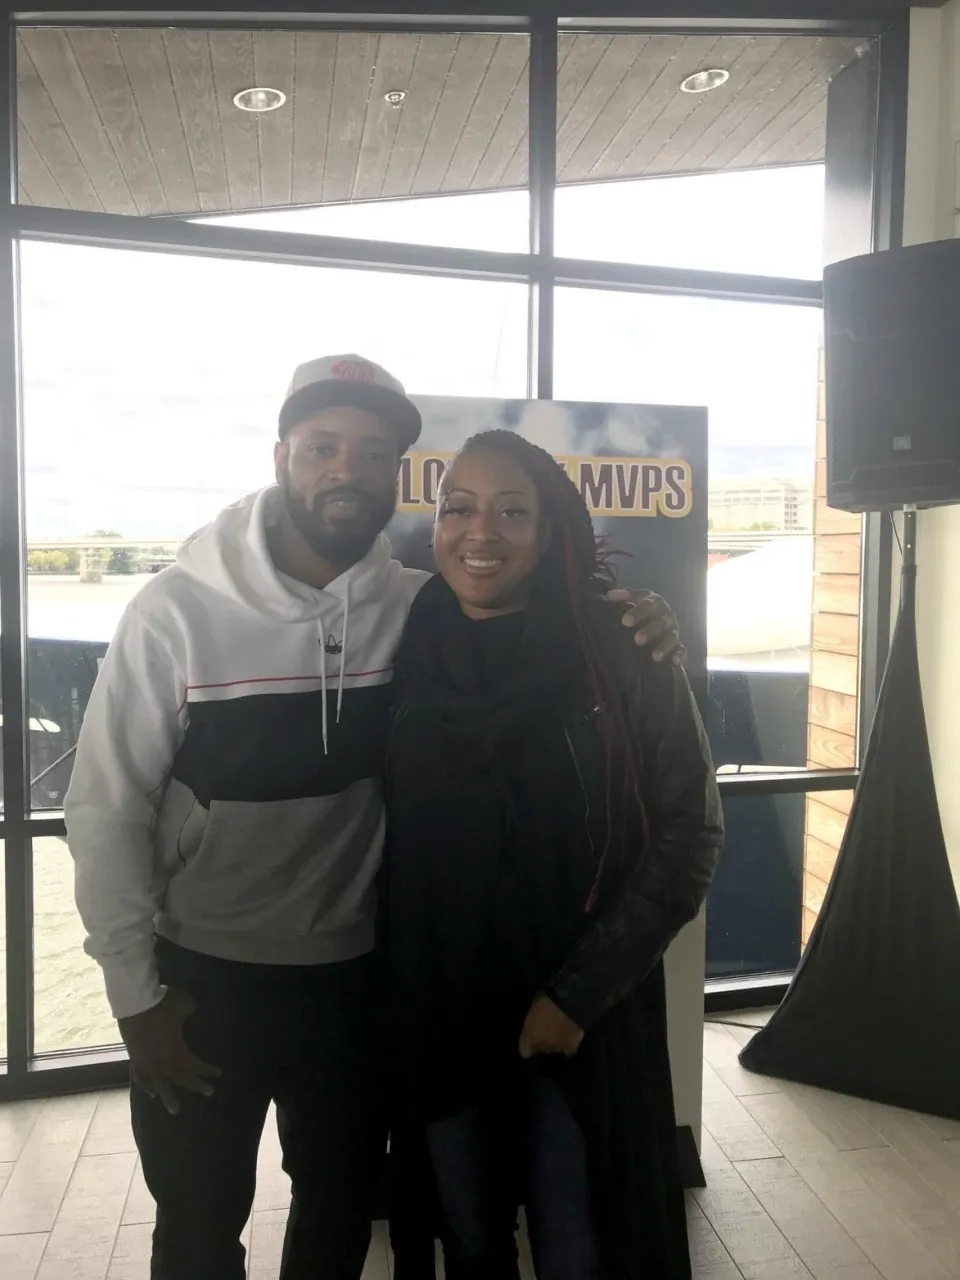 Santana Moss posing for a photo with a player